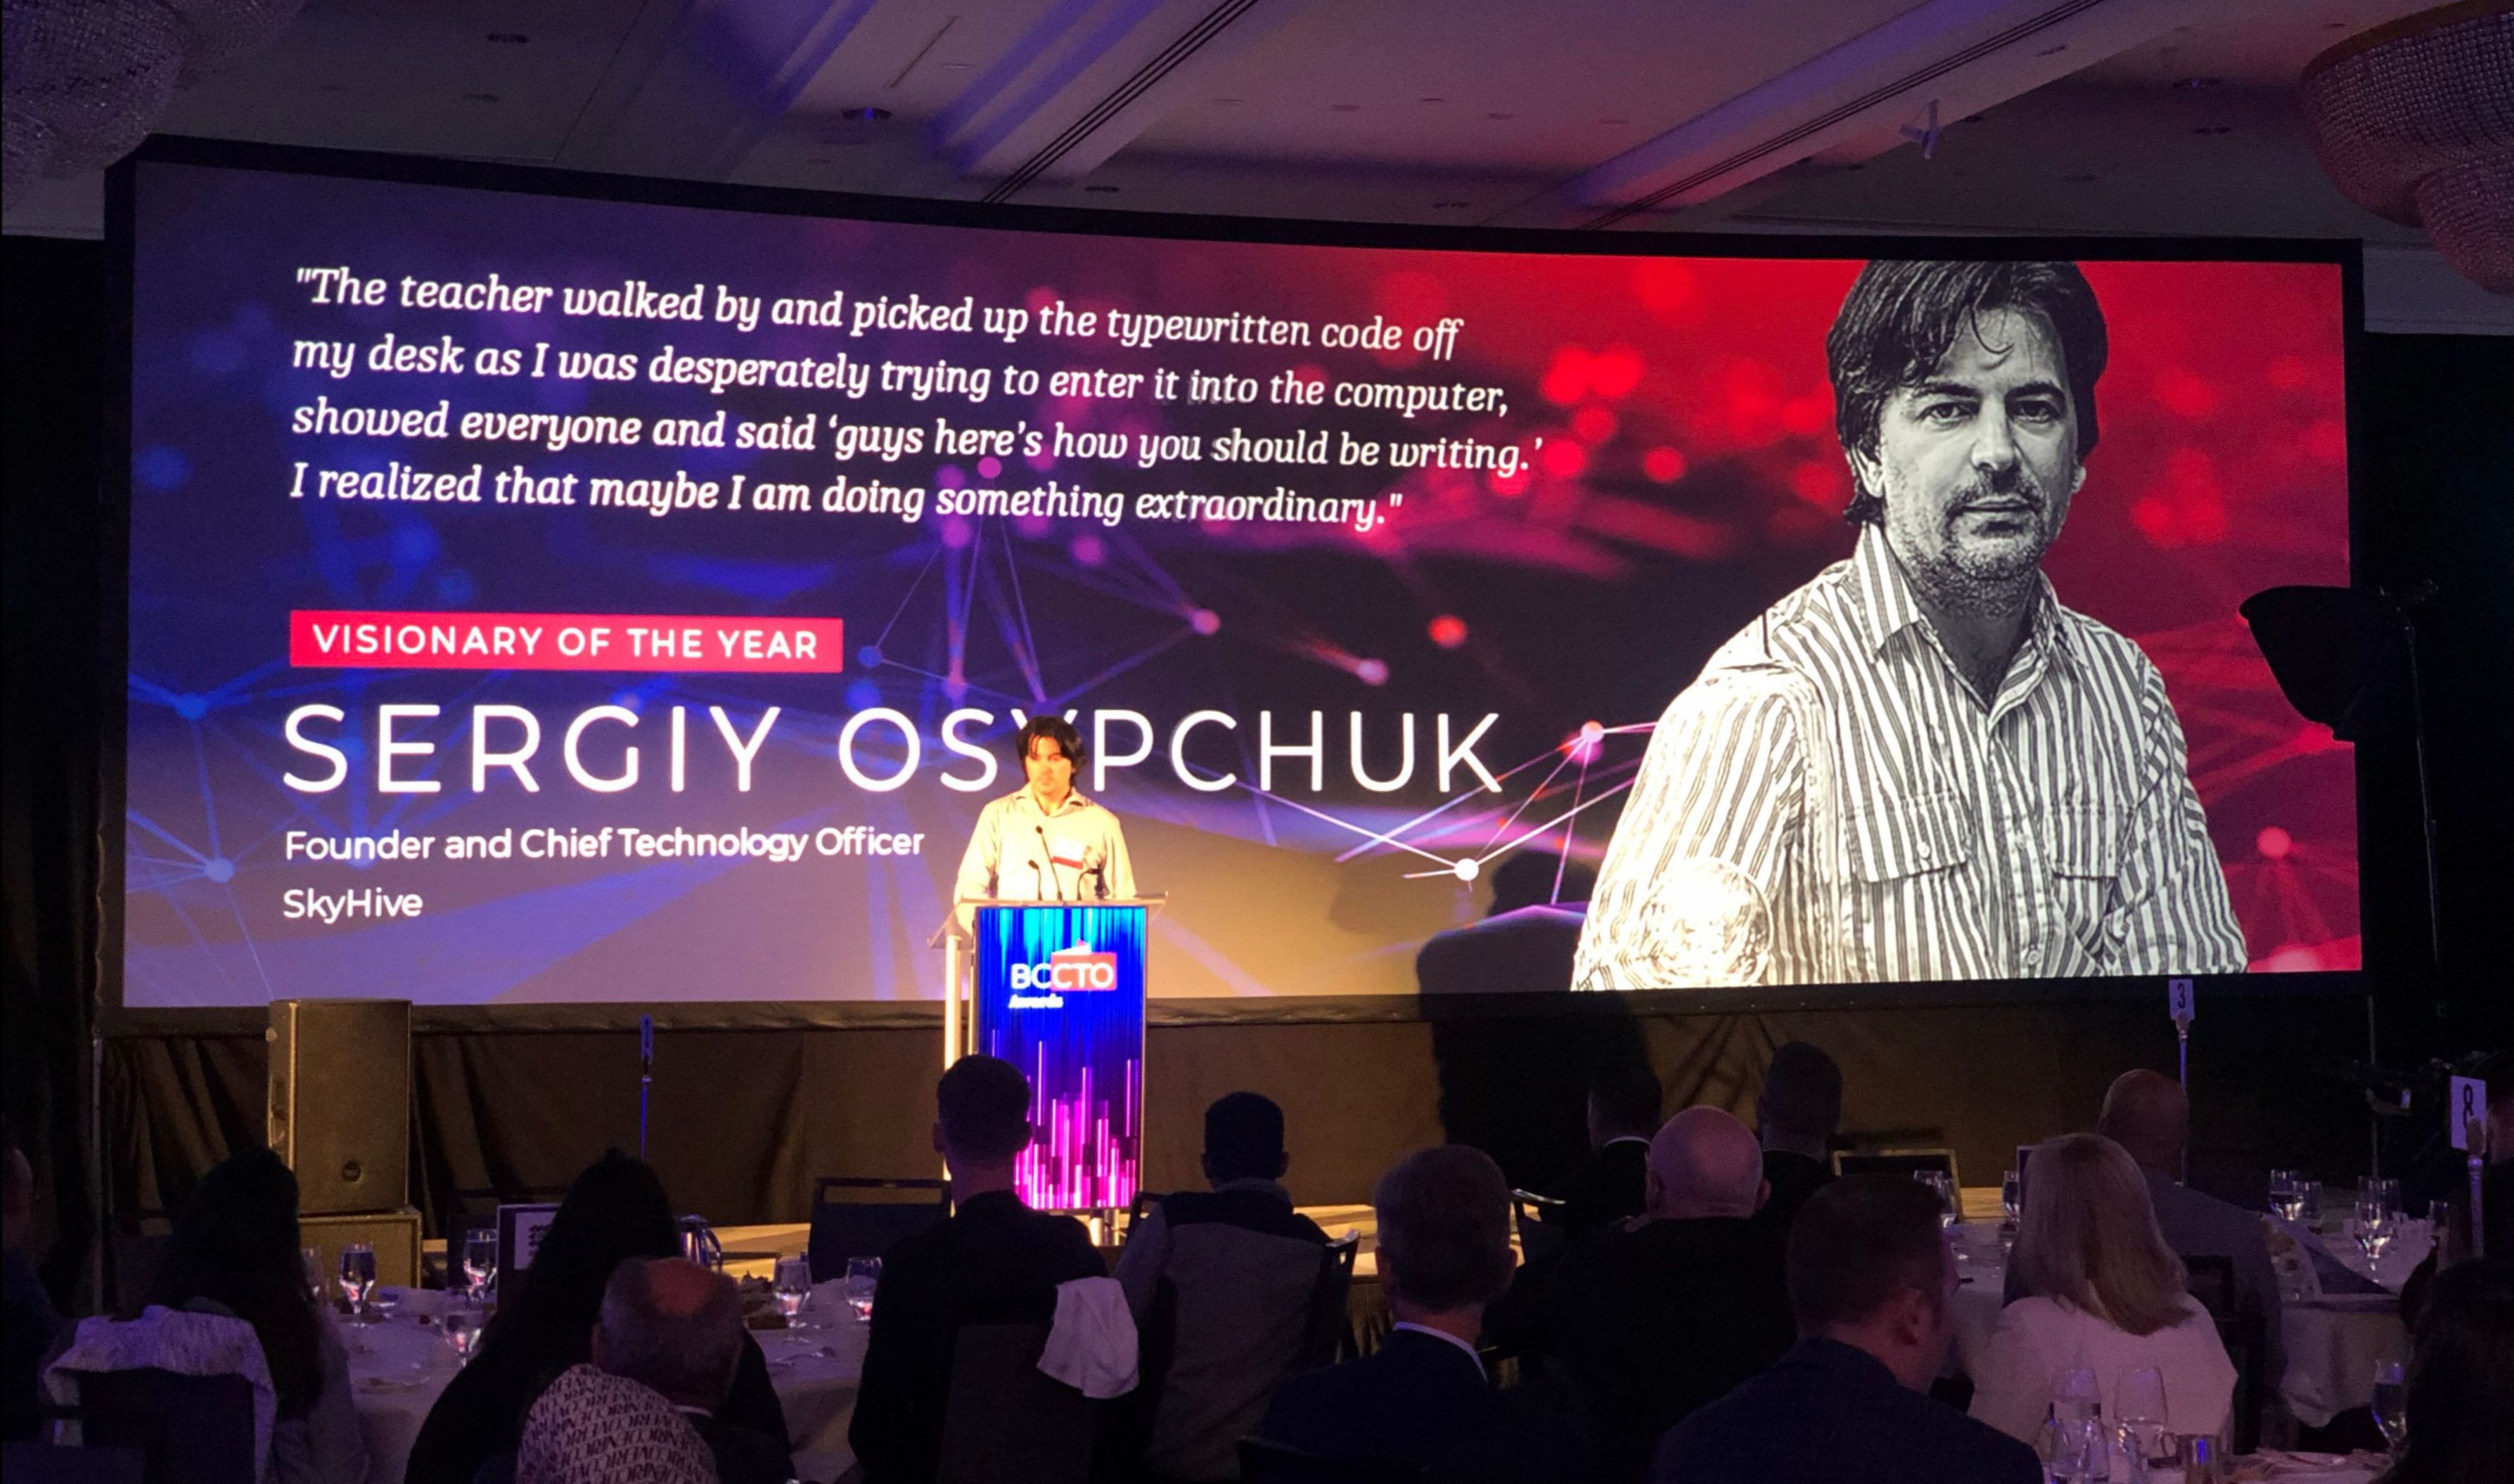 SkyHive CTO Sergiy Osypchuk for being recognized as the Visionary of the Year by the BC CTO Awards